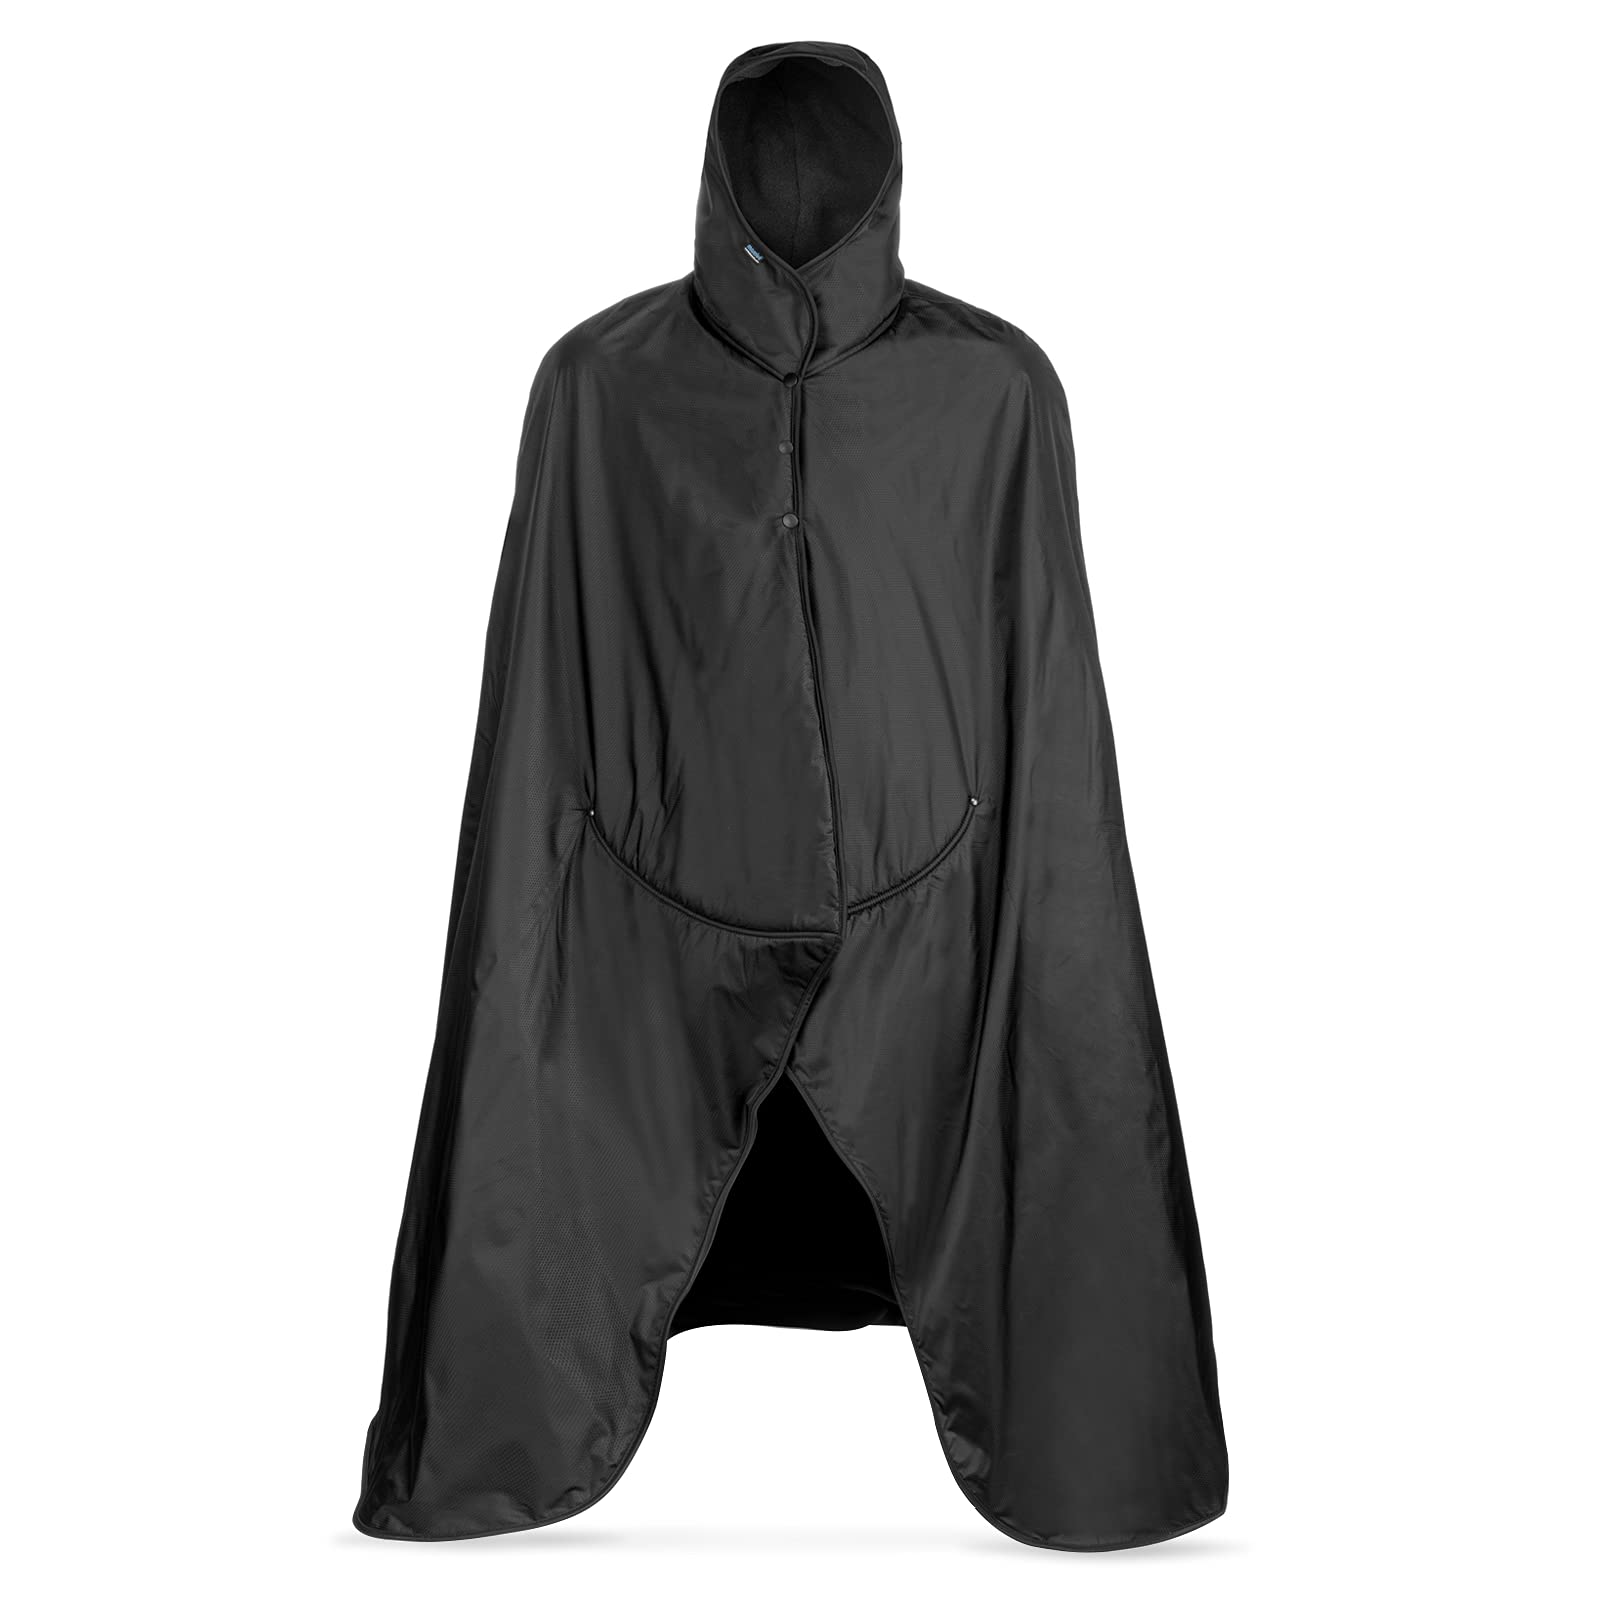 Large Extreme Weather Hooded Blanket by Mambe - Charcoal - 100% Waterproof and Windproof with Premium Stuff Sack - Perfect for Stadiums and Watchin...